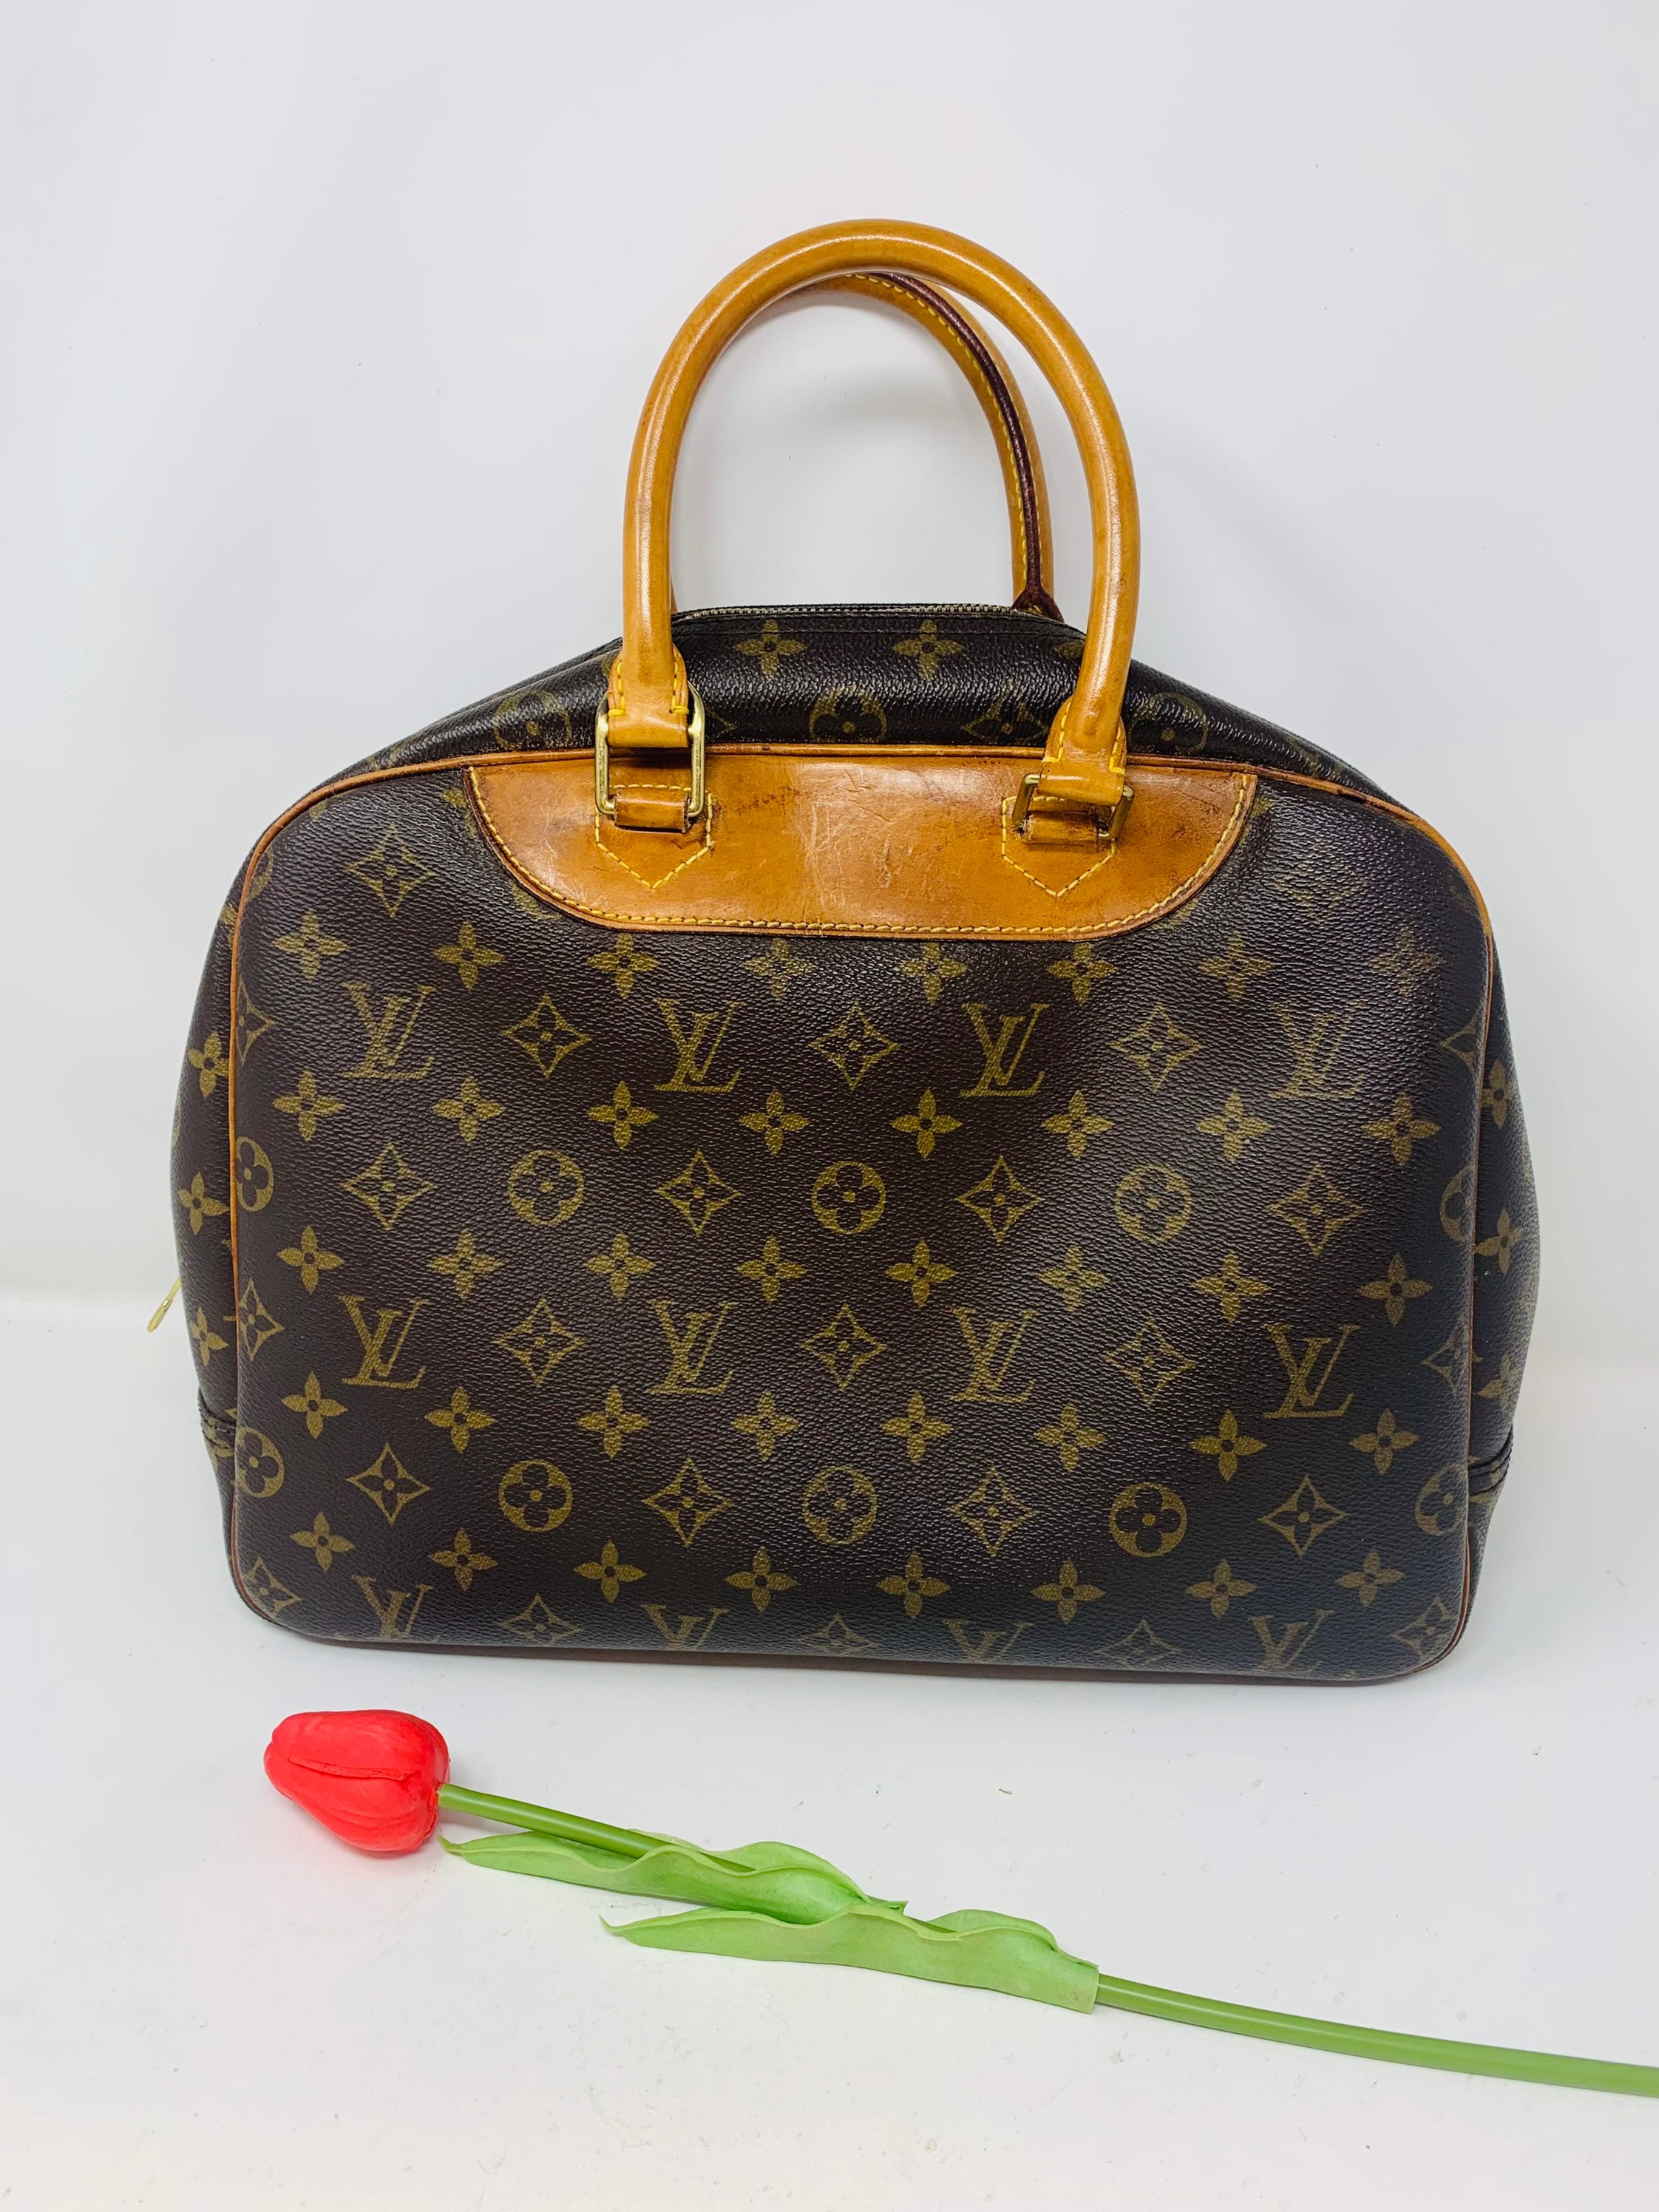 Buy Authentic Pre-owned Louis Vuitton Monogram Sac Balade Large Shoulder  Tote Bag M51112 210520 from Japan - Buy authentic Plus exclusive items from  Japan